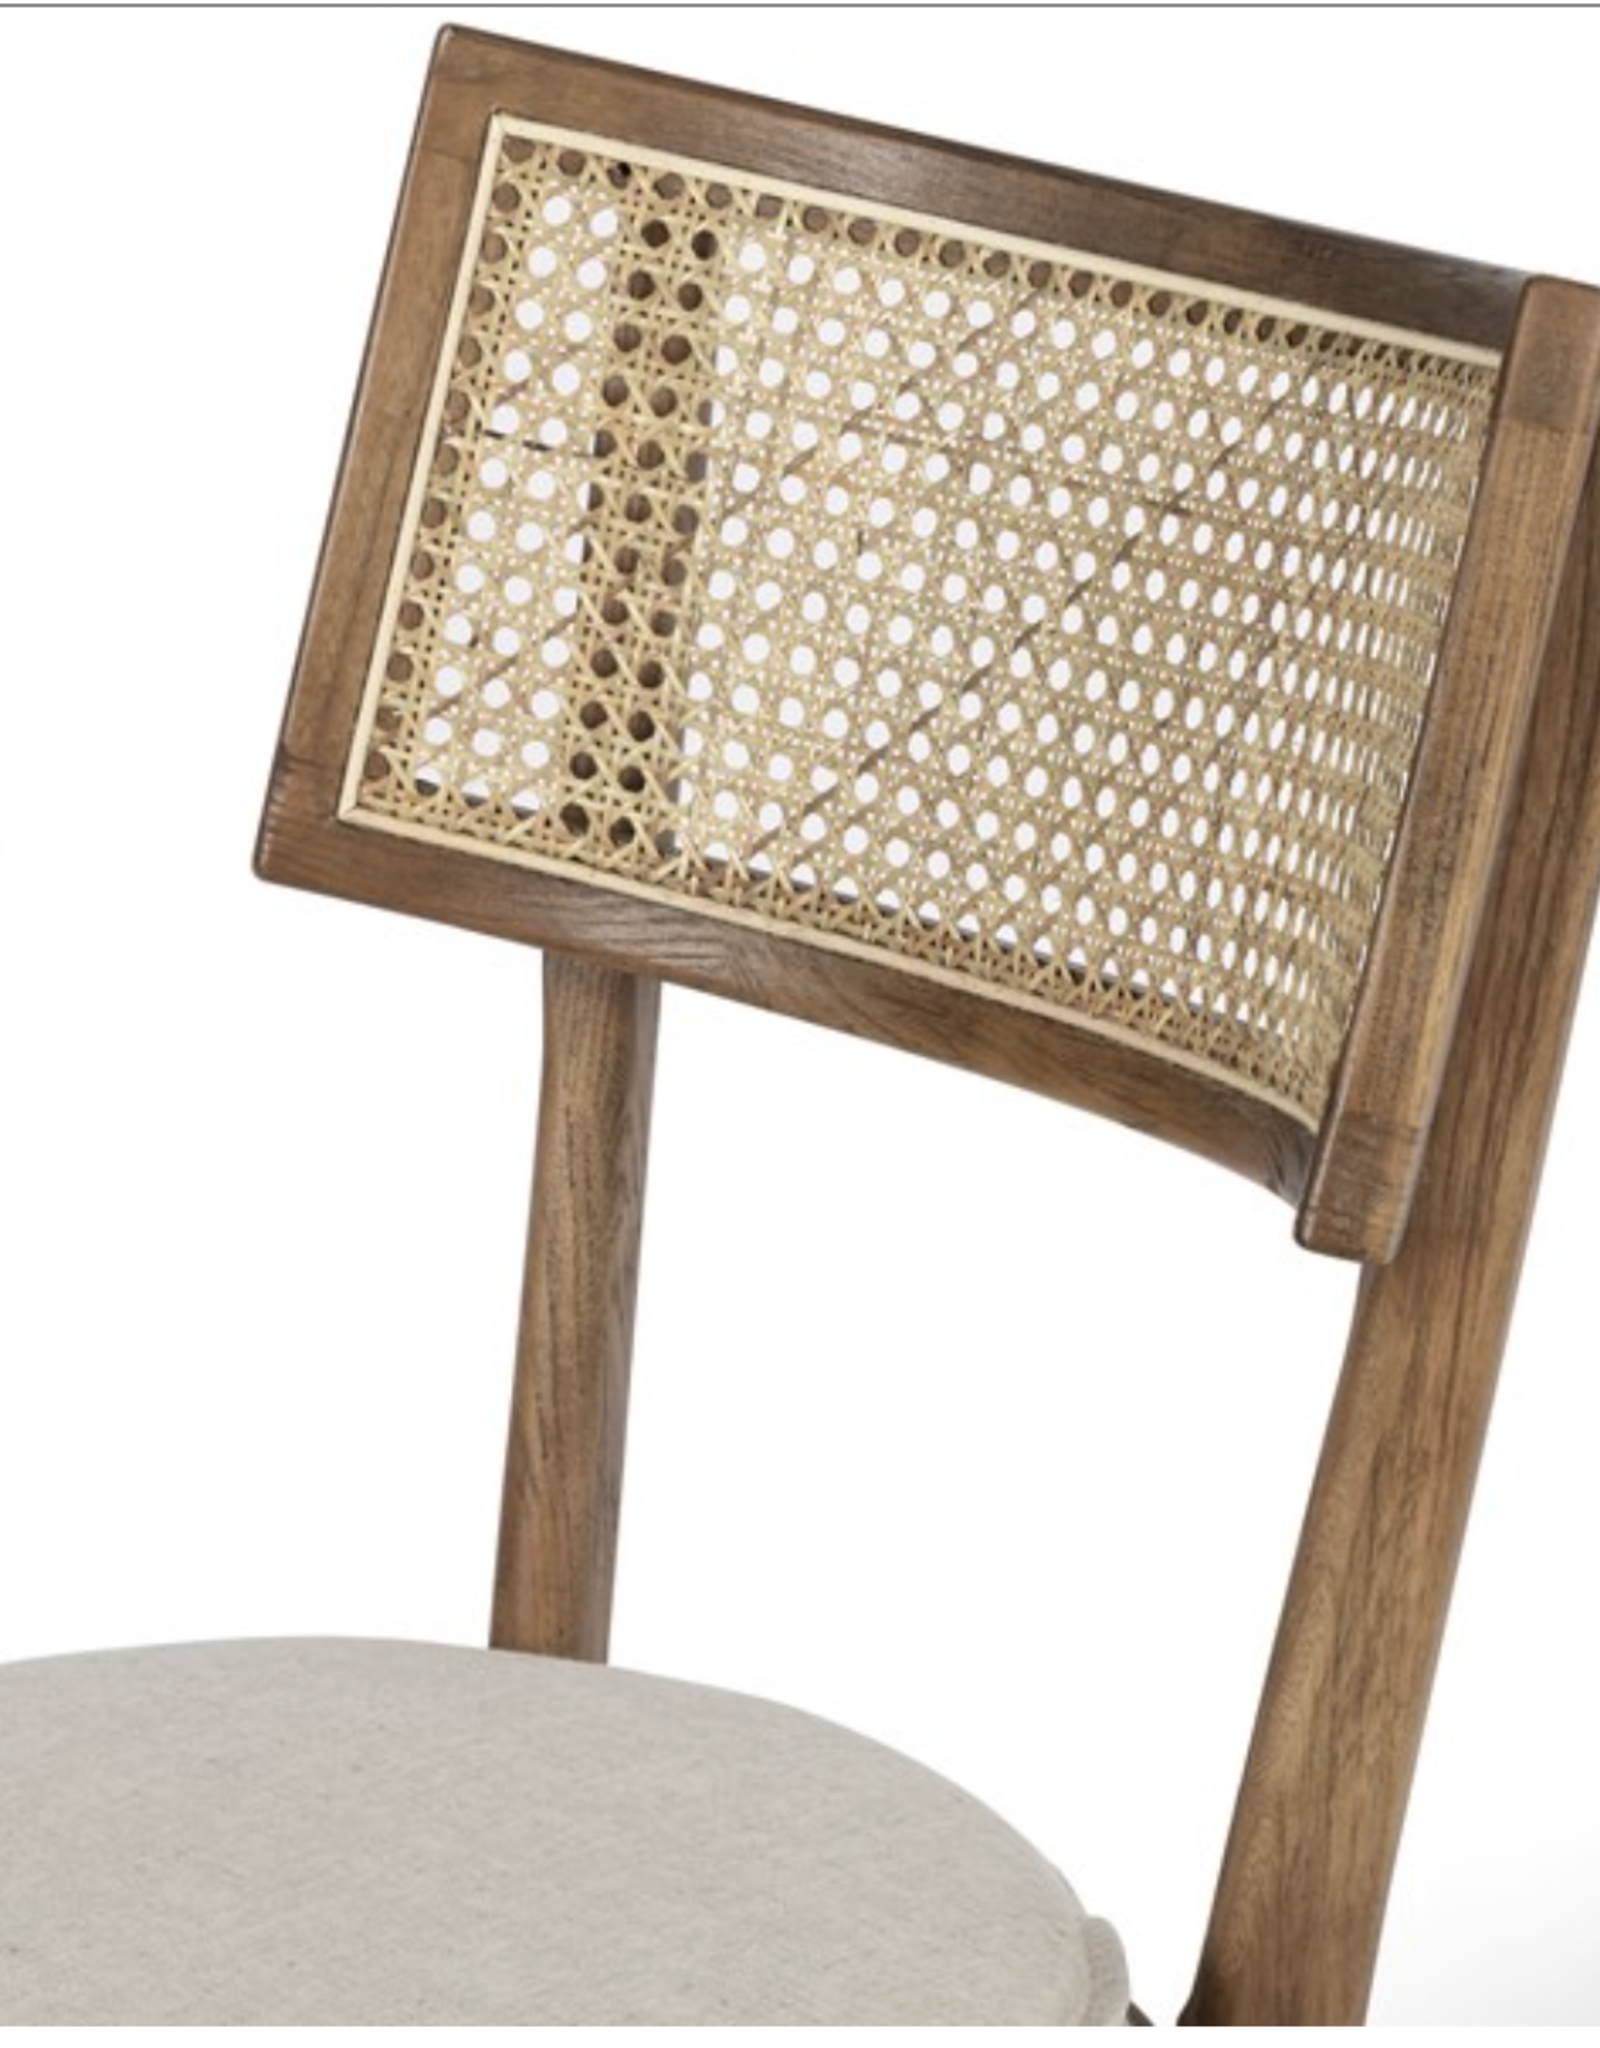 Britt Dining Chair - Toasted Nettlewood